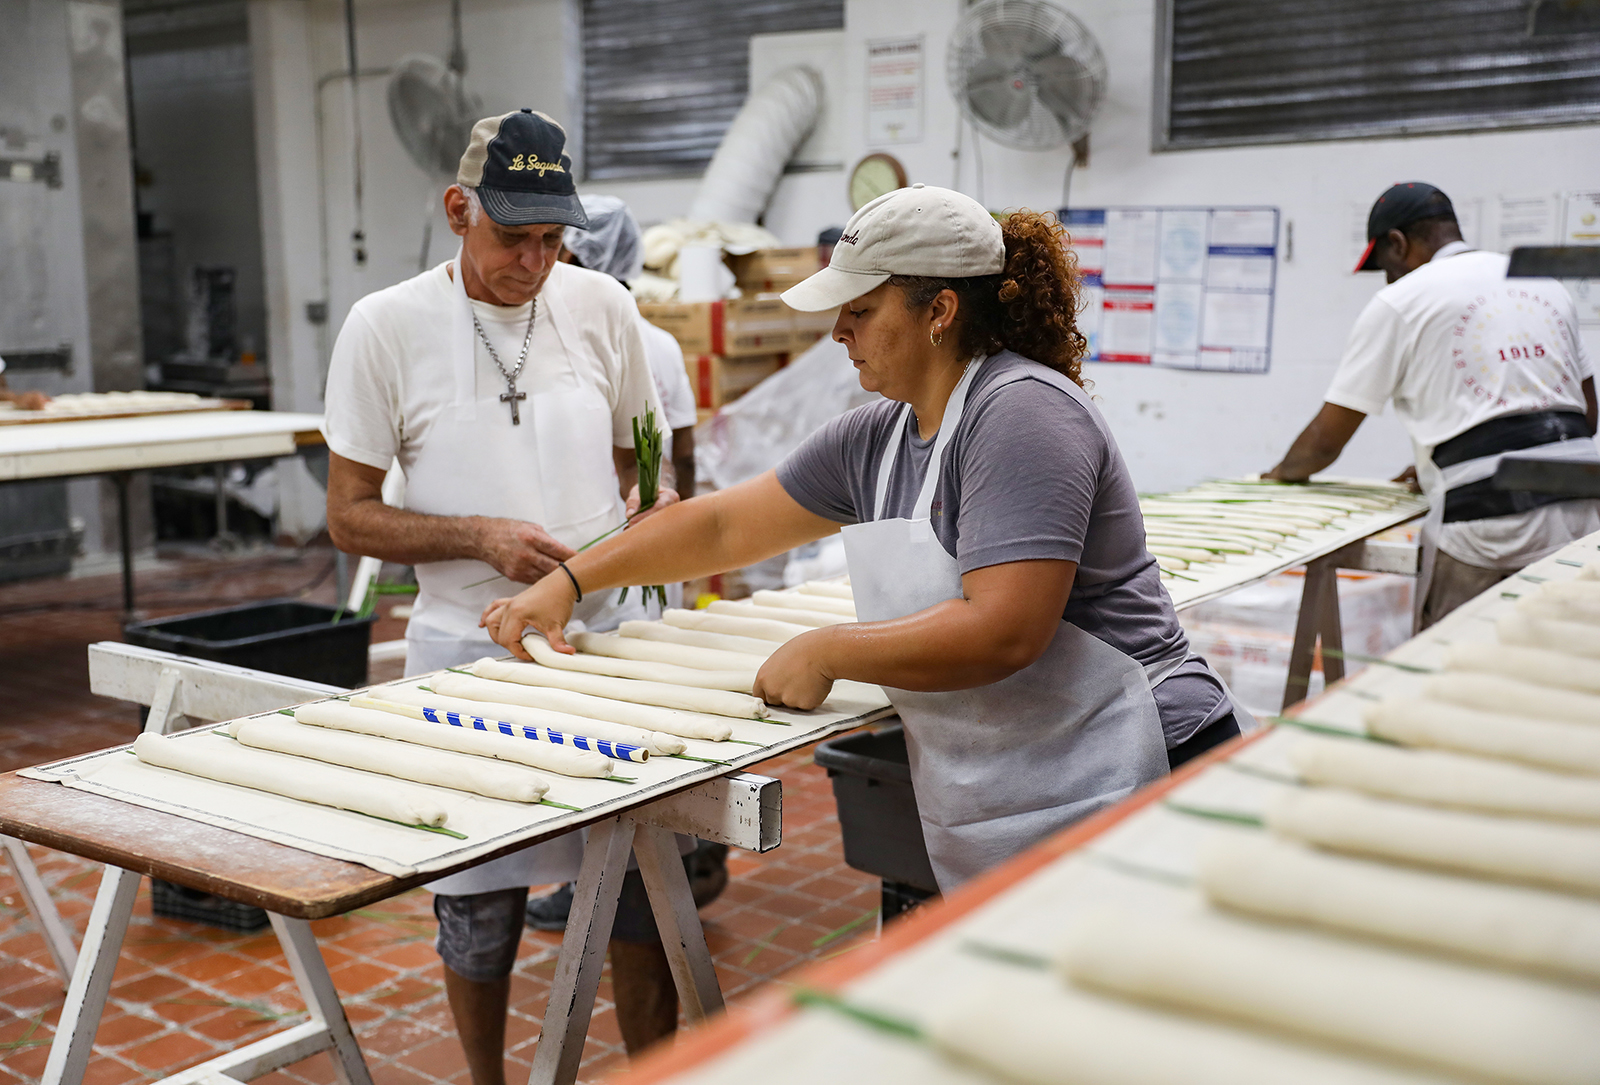 Yovanni Perdomo (36), middle, and Carlos Cabota (56), left, of Tampa place palmetto leaves on loaves and flip them at La Segunda Central Bakery in Ybor City. 